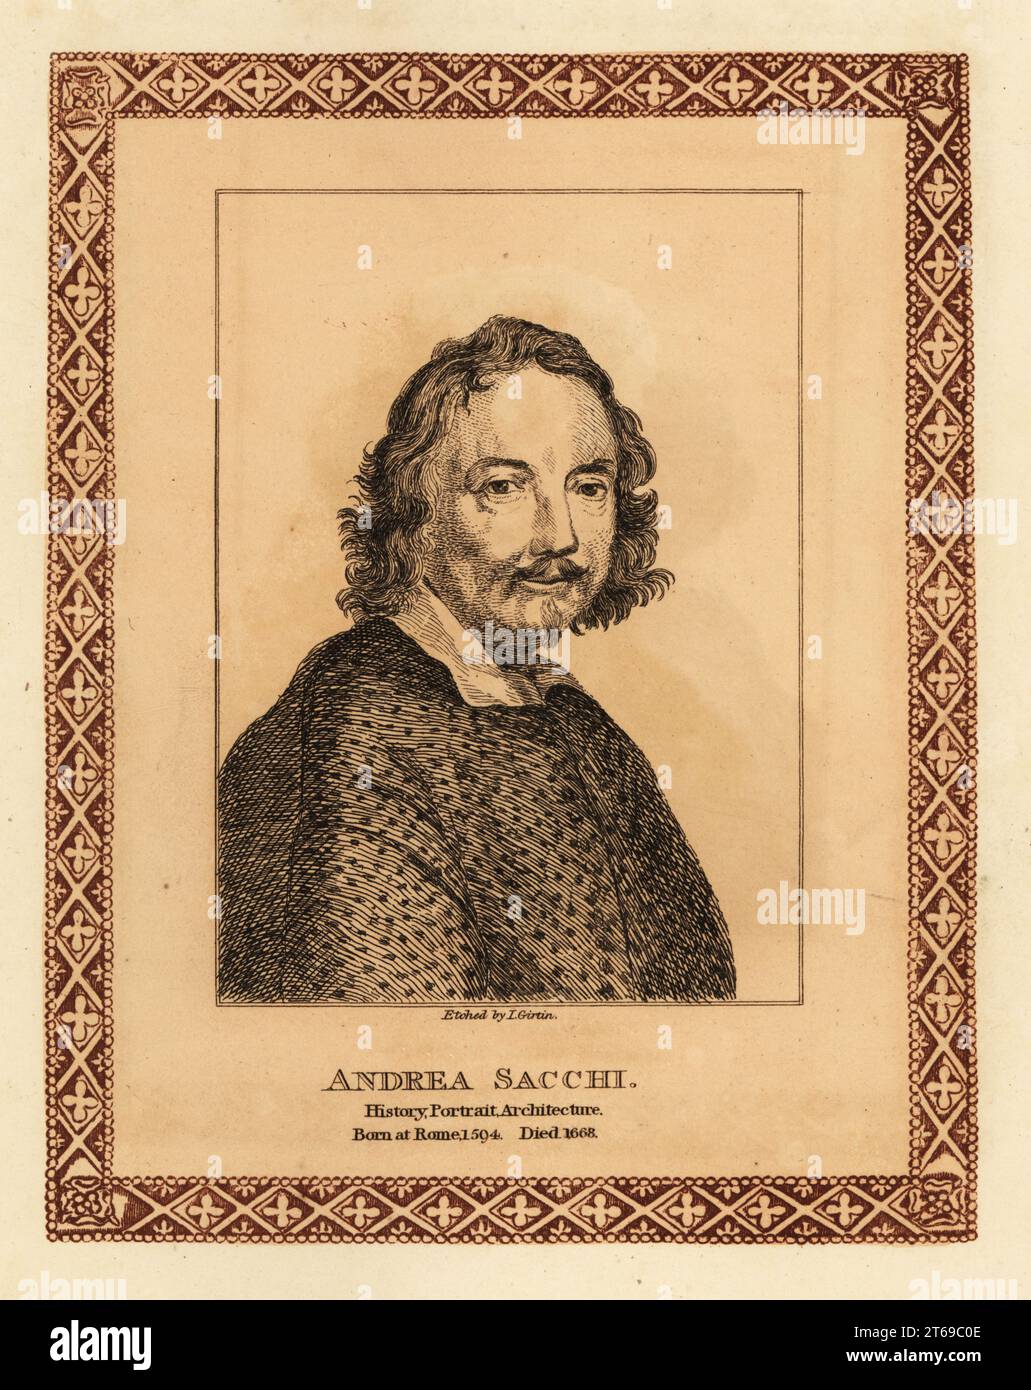 Andrea Sacchi, 1599-1661, Italian painter of High Baroque Classicism, active in Rome. Andrea Sacchi, history, portrait, architecture. Tinted etching within a decorative border by John Girtin after a portrait by Carlo Maratta from John Girtins Seventy-Five Portraits of Celebrated Painters from Authentic Originals, J. MCreery, London, 1817. Stock Photo